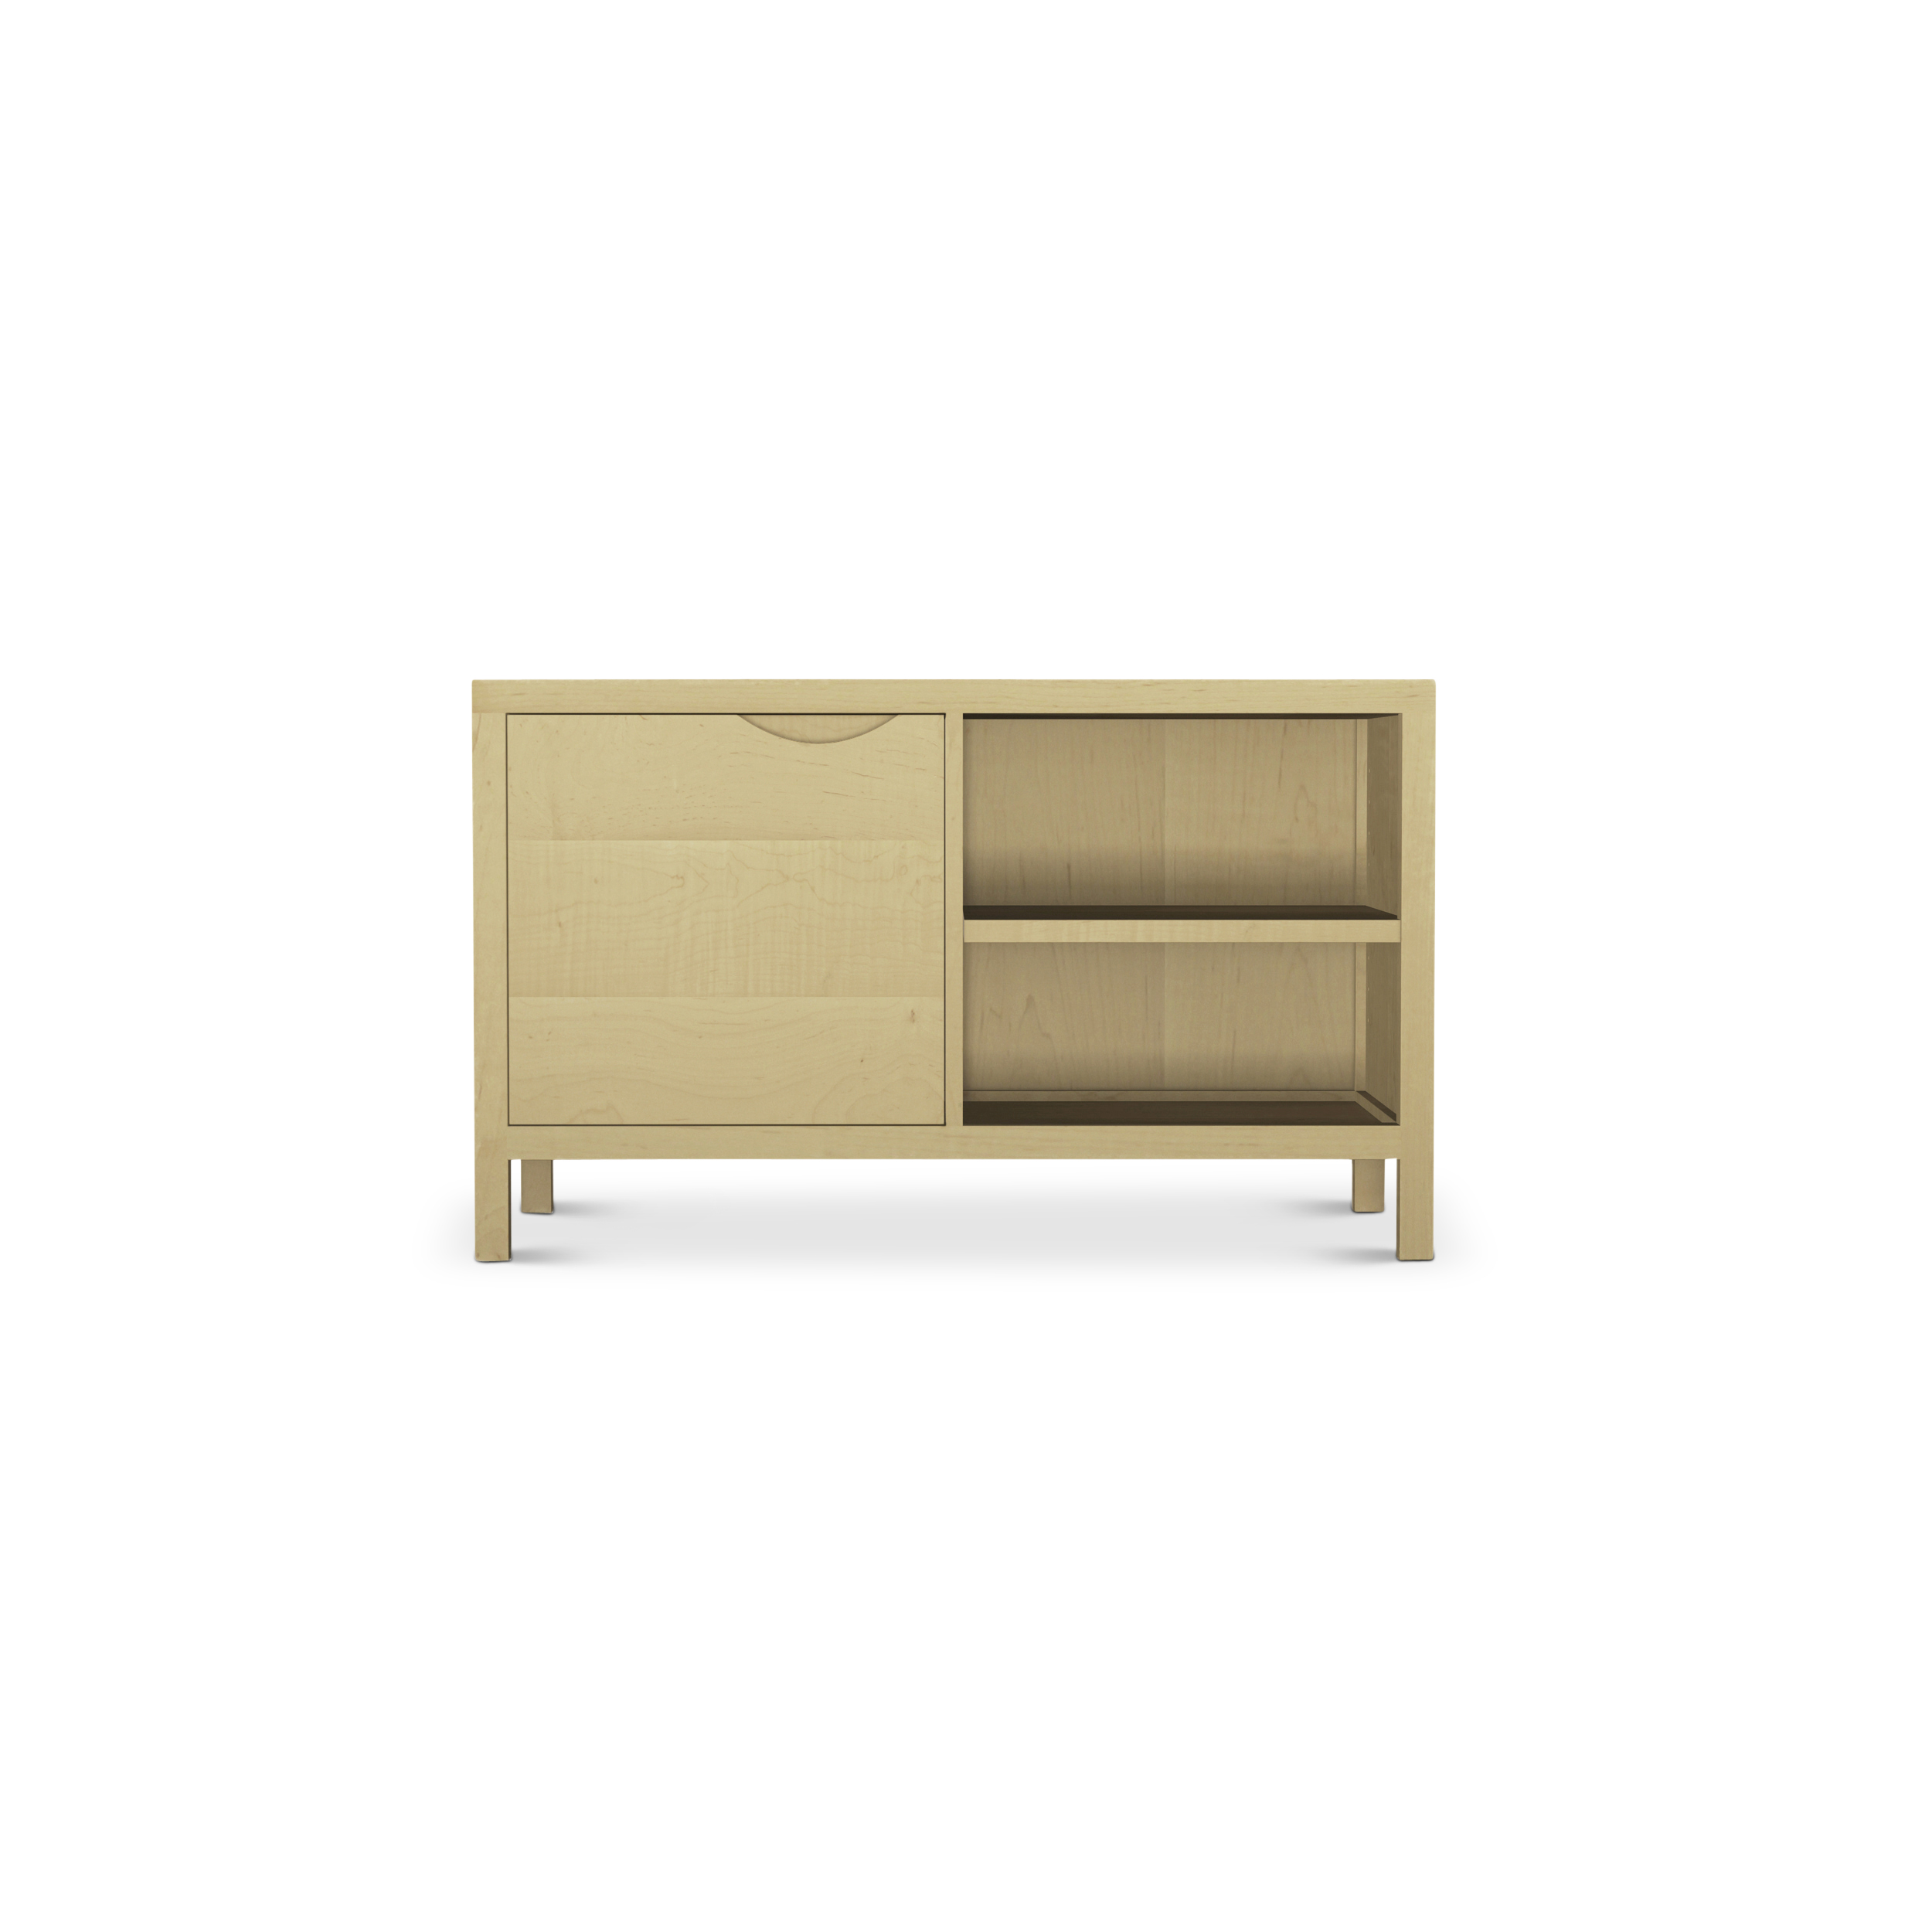 Series 353 Media Cabinet With One Door At 42″ In Width